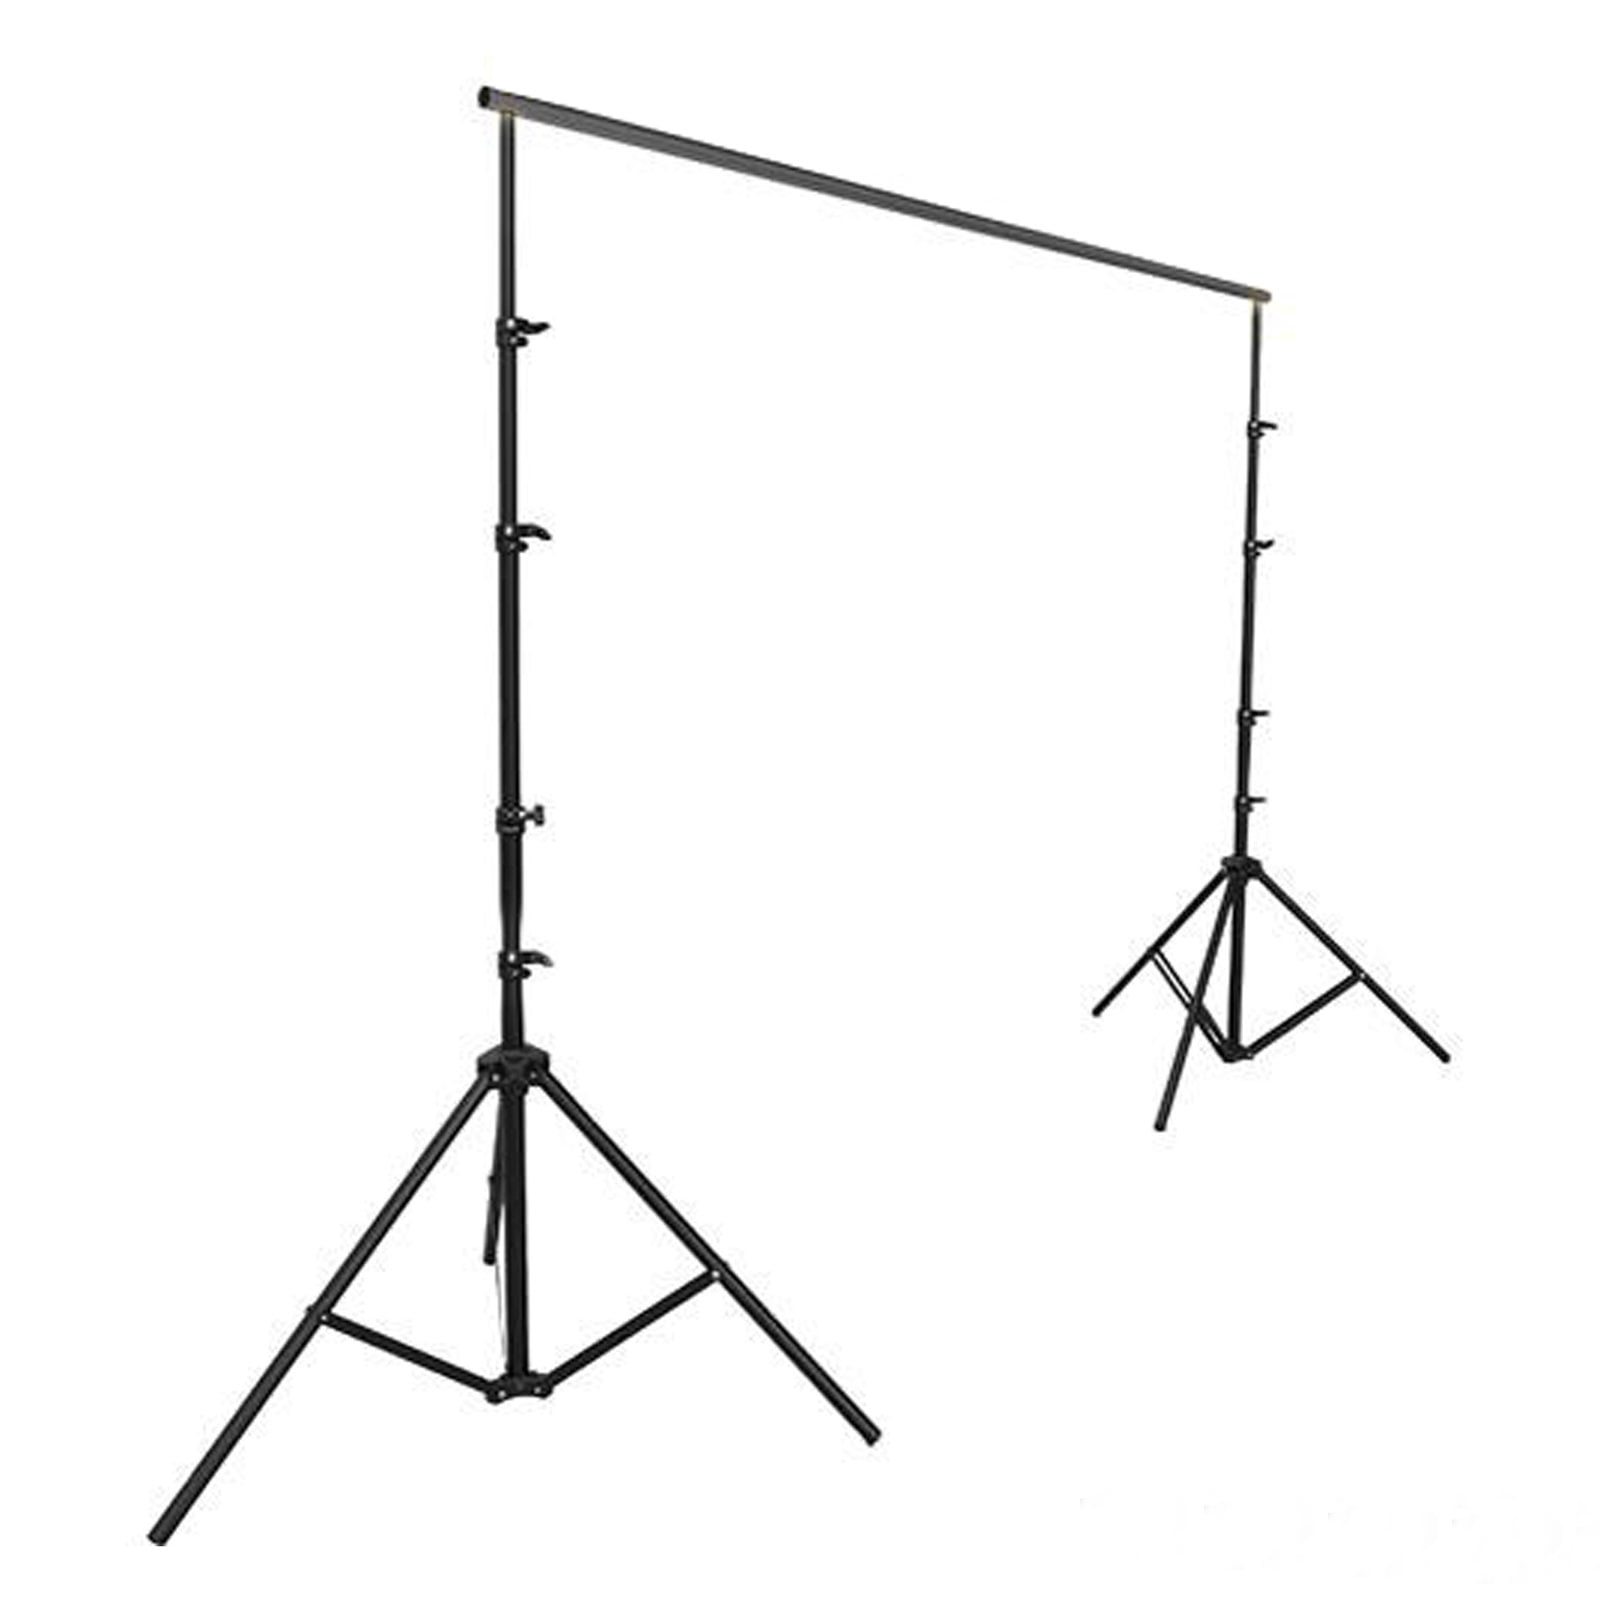 Efavormart 12ft x12ft Heavy Duty Pipe and Drape Kit Wedding Photography Backdrop Stand